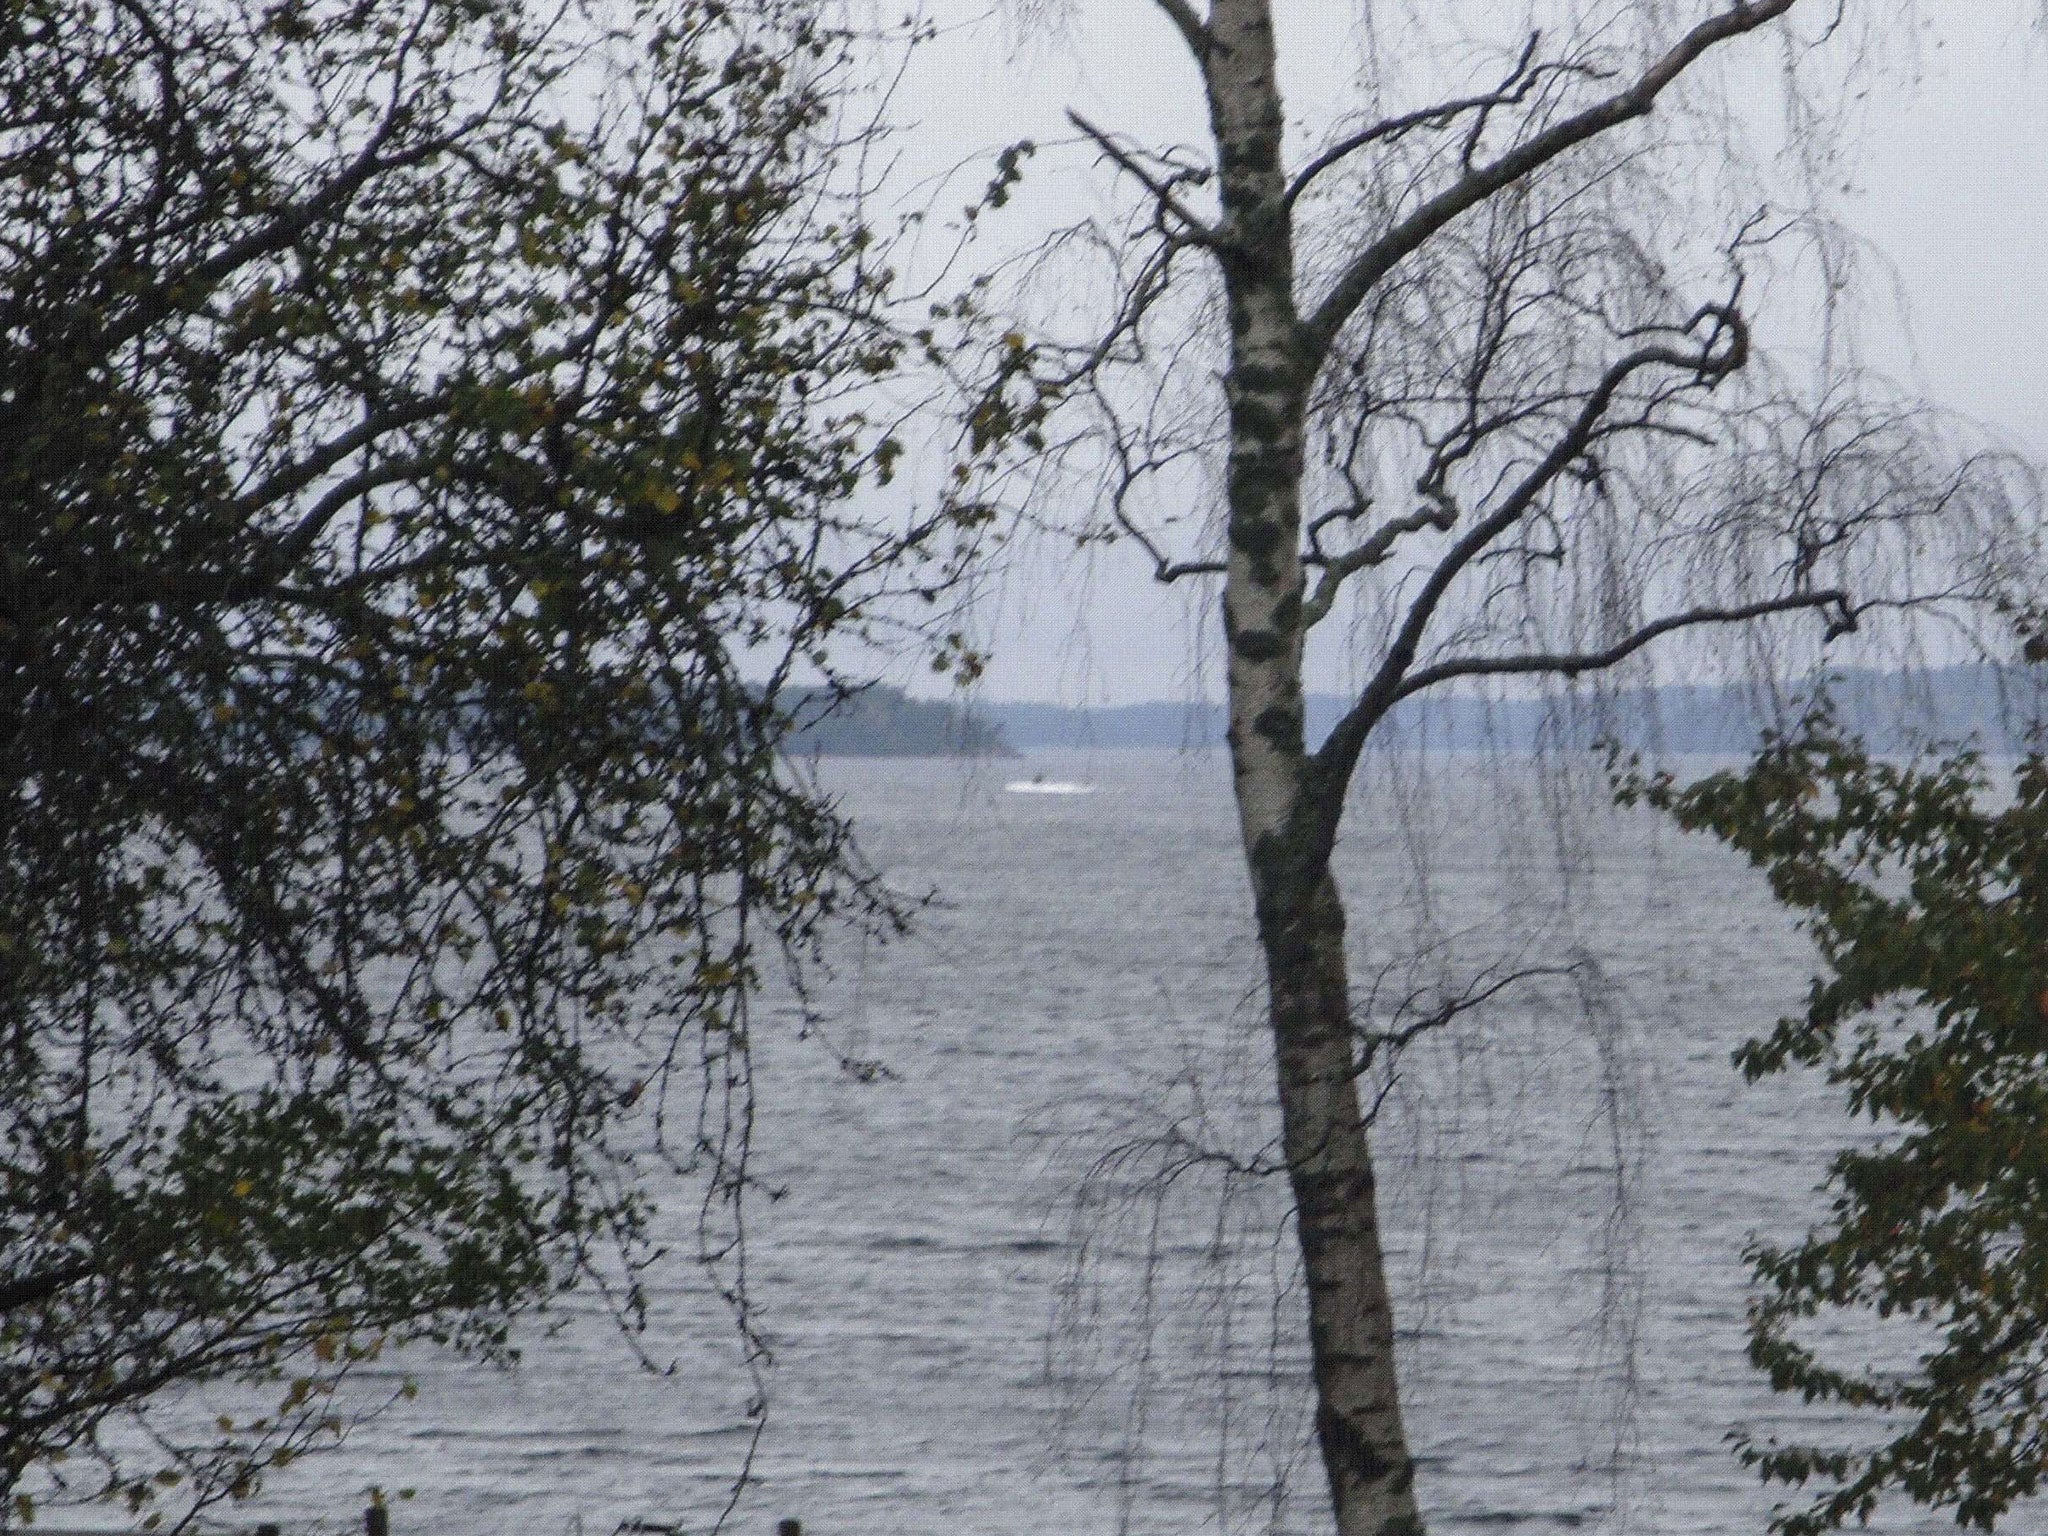 This amateur photo released by the Swedish military shows a 'man-made object' in the water that sparked an unconfirmed hunt for a possibly damaged Russian submarine